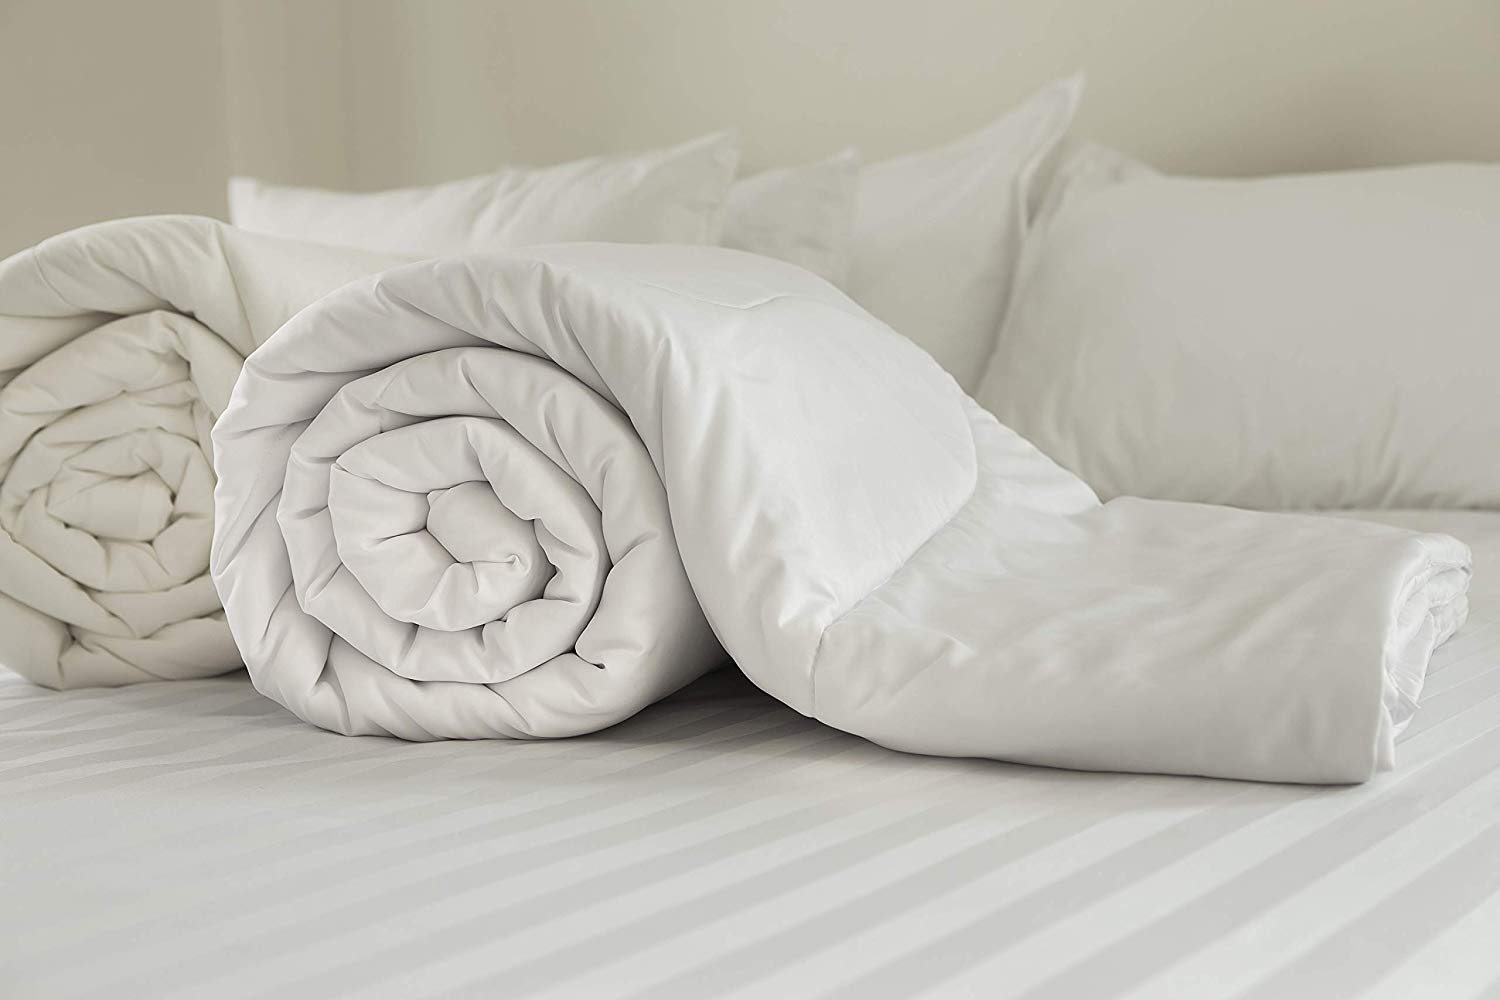 Twin Summer//Spring A1 Home Collections 100/% Pure New Zealand Wool Light Weight Certified Organic Cotton Cover 8 Ties Duvet Insert 68X86 200 GSM White